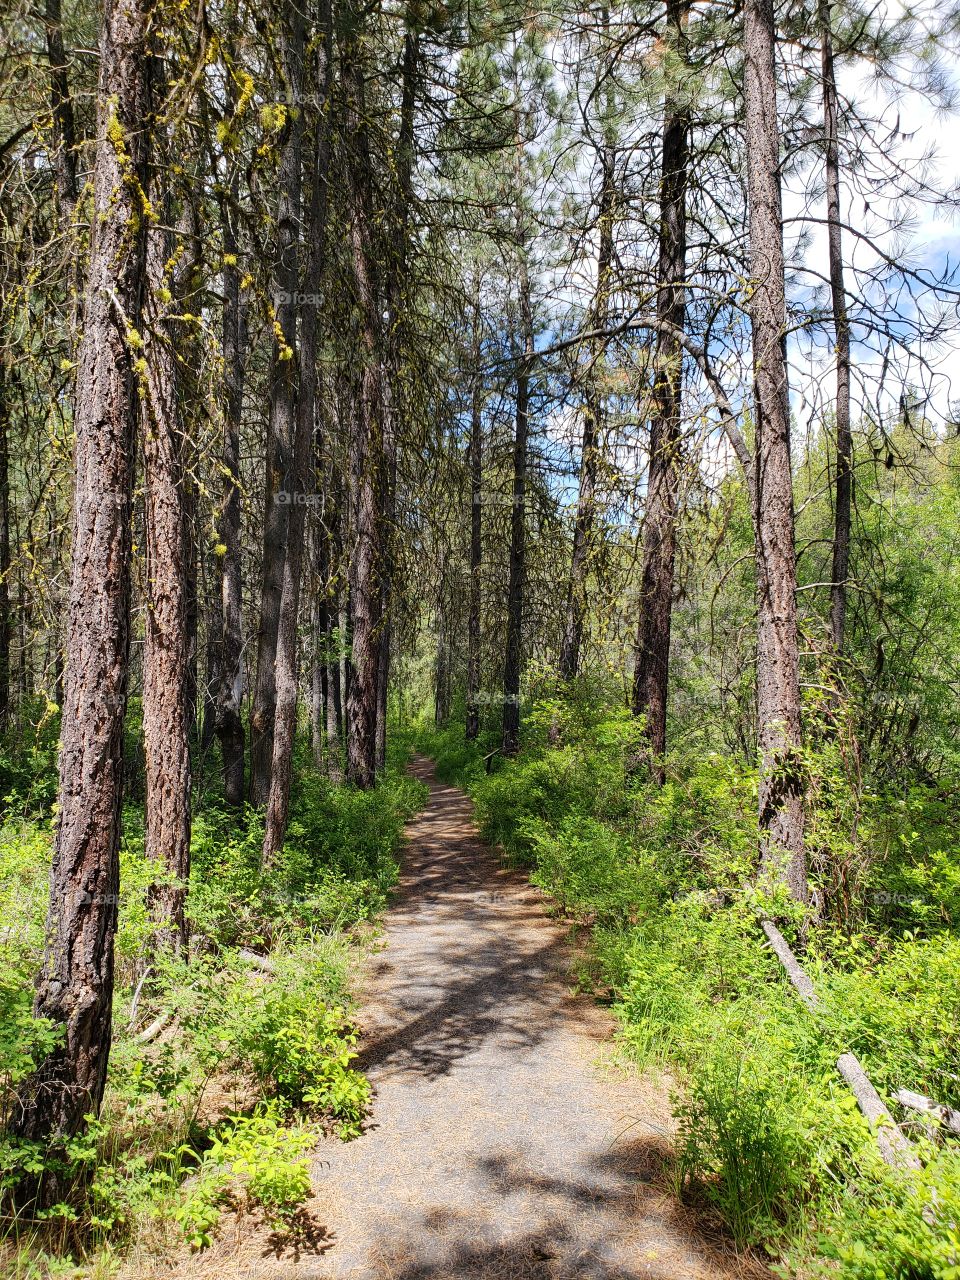 A dirt path leads through the lush green forest floor and towering pine trees in the Deschutes National Forest in Central Oregon on a sunny summer day.